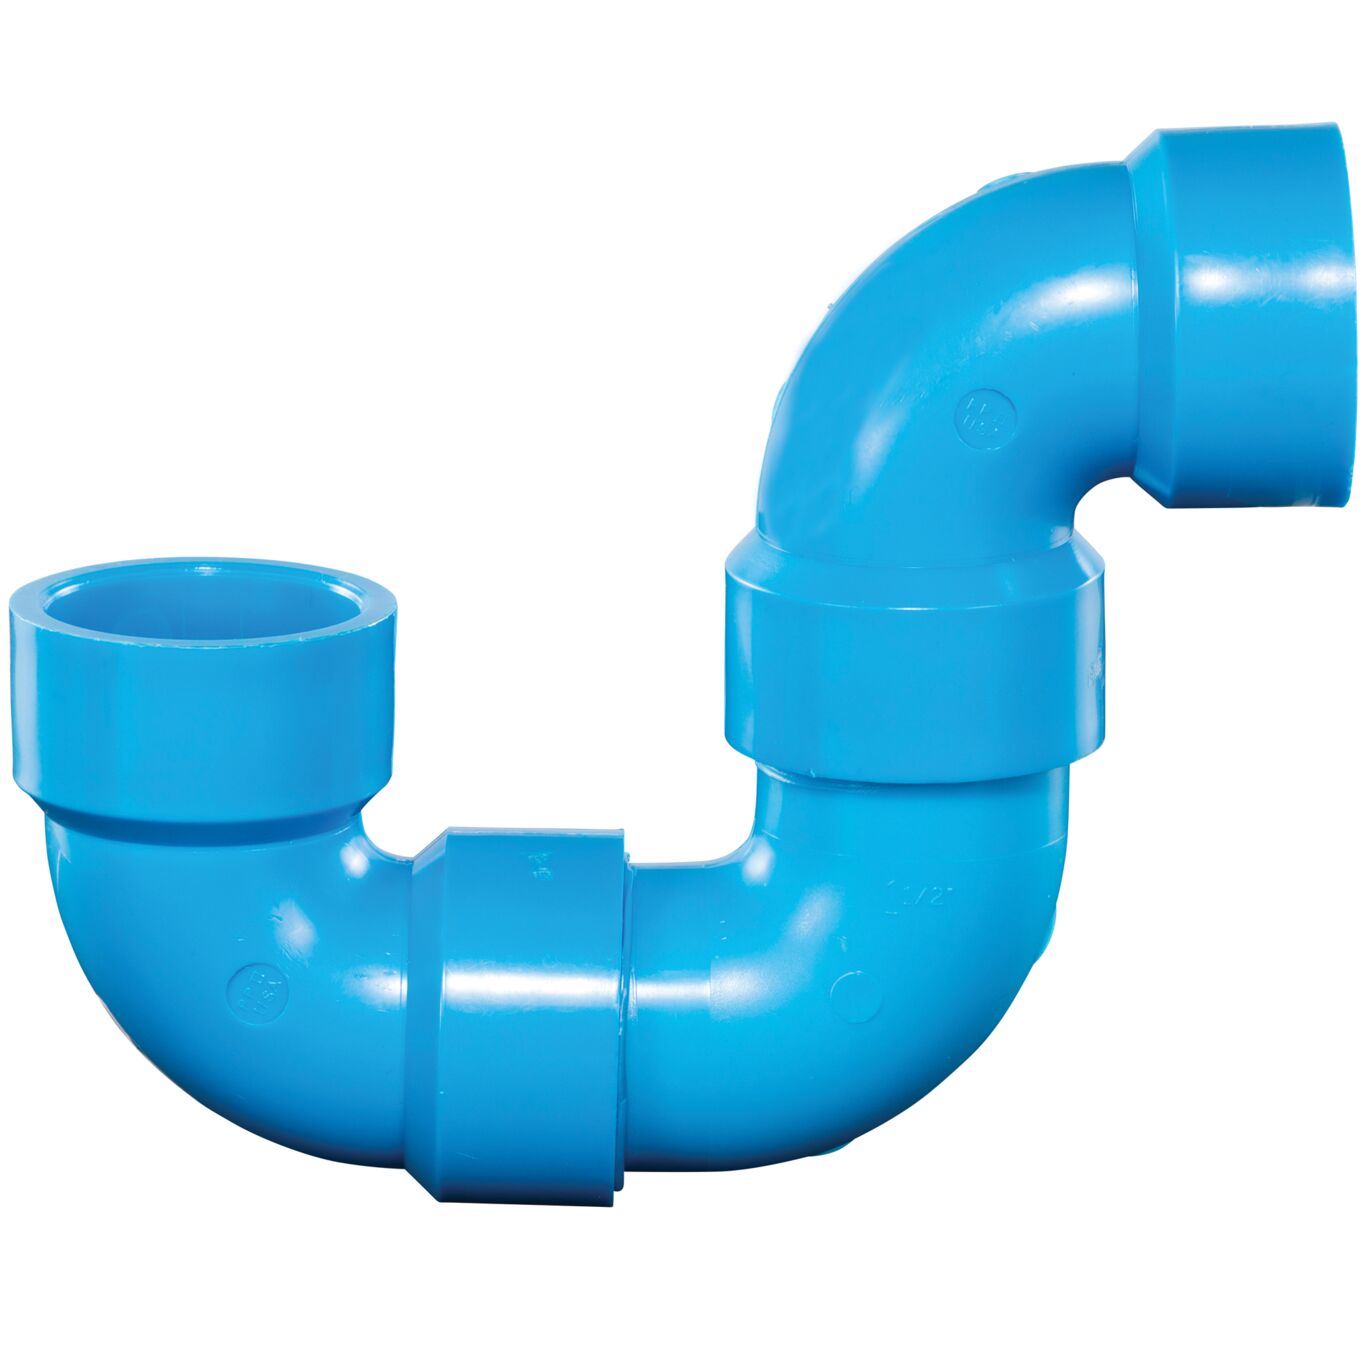 How to Choose and Install a PVC P-Trap - PVC Fittings Online